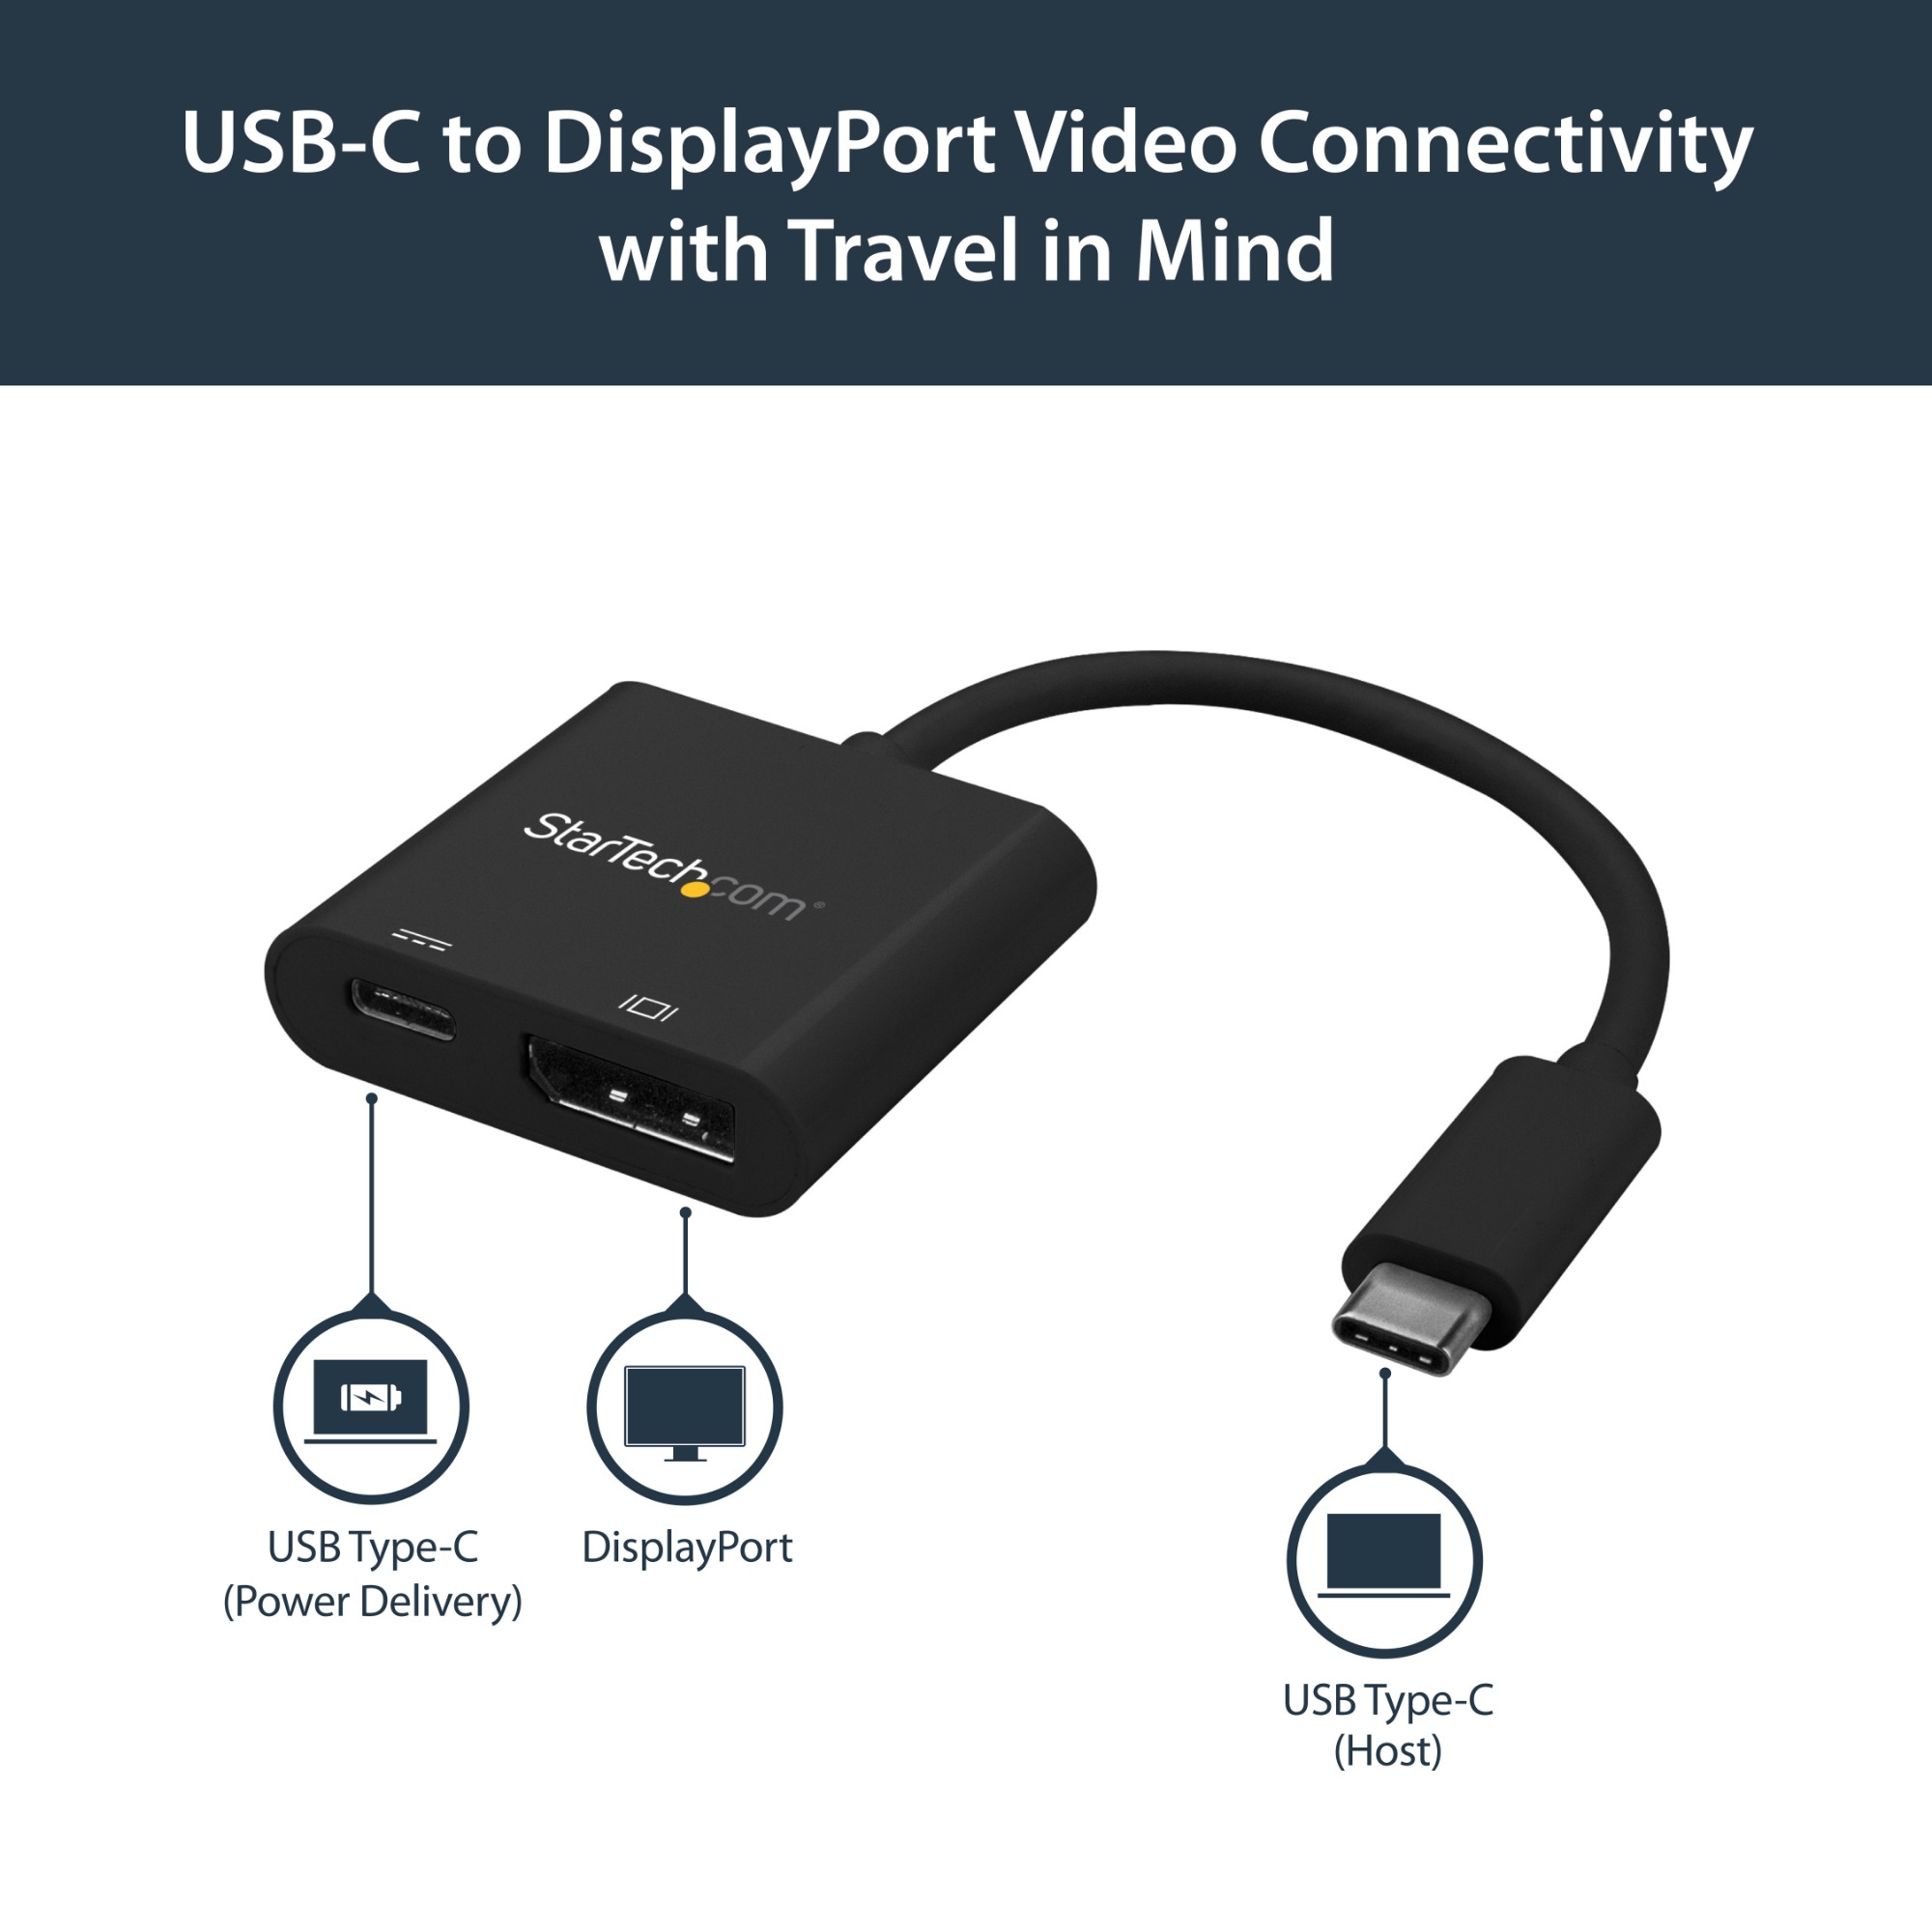 StarTech.com USB C to DisplayPort Adapter with Power Delivery - 4K 60Hz HBR2 - USB Type-C to DP 1.2 Monitor Video Converter w/ Charging - 60W PD Pass-Through - Thunderbolt 3 Compatible